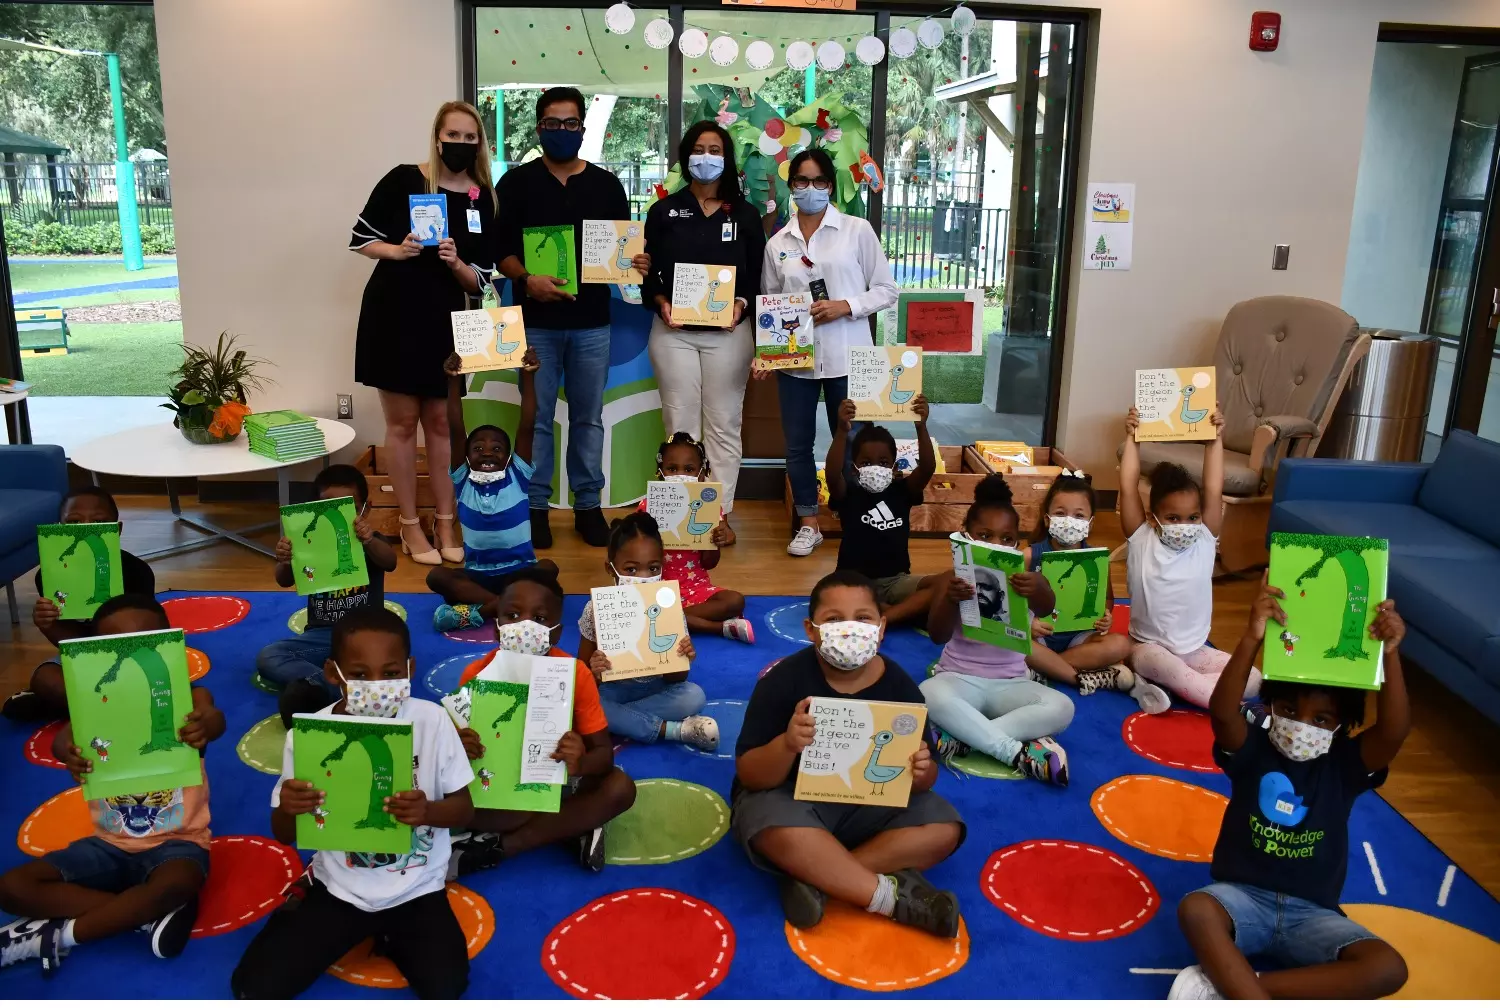 a photo of children holding up books